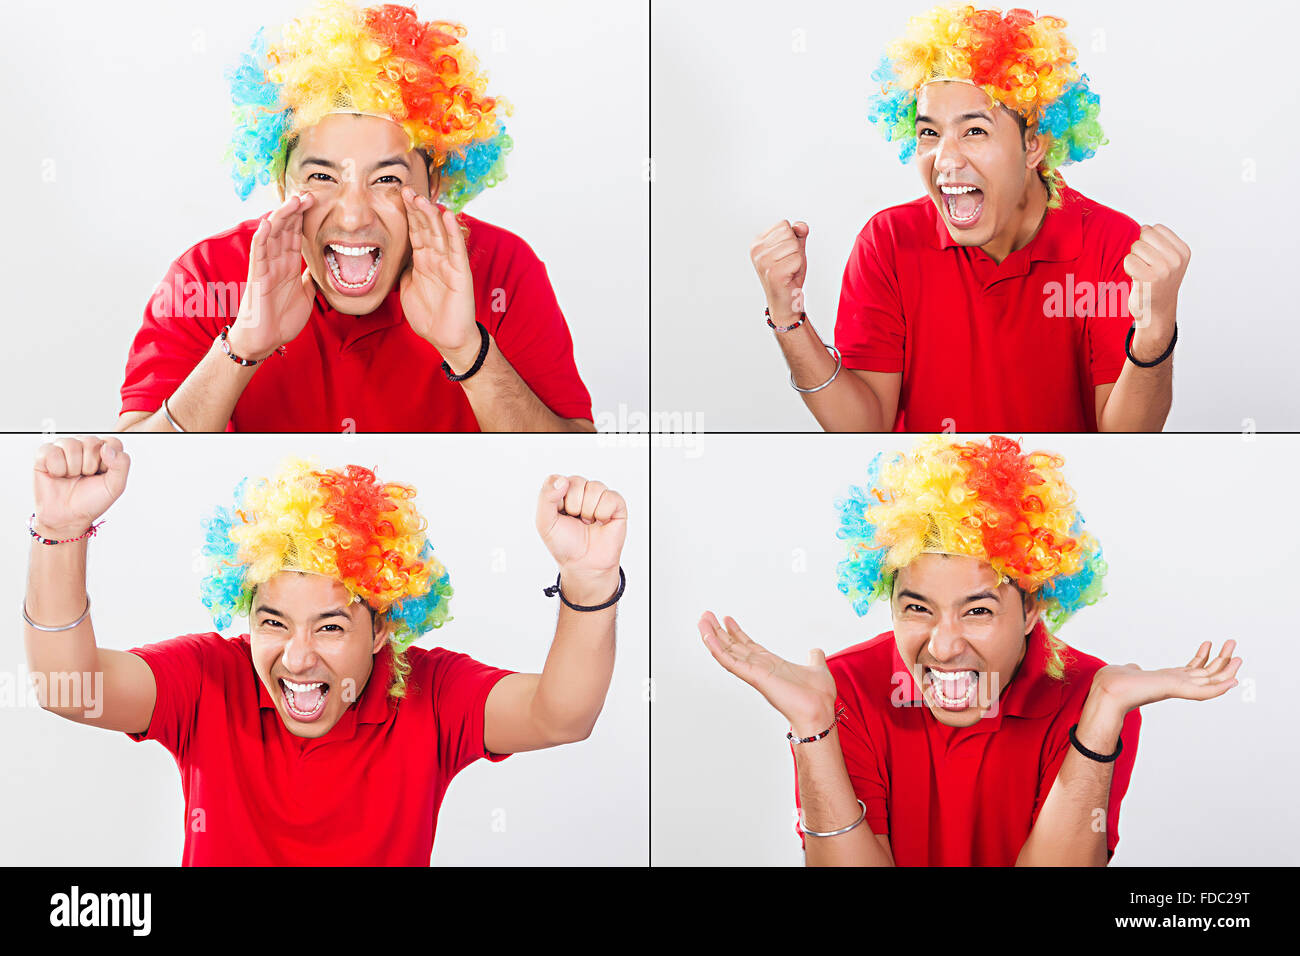 Shouted 1 Indian Young man Wearing Wig Facial Expression Montage Picture Stock Photo